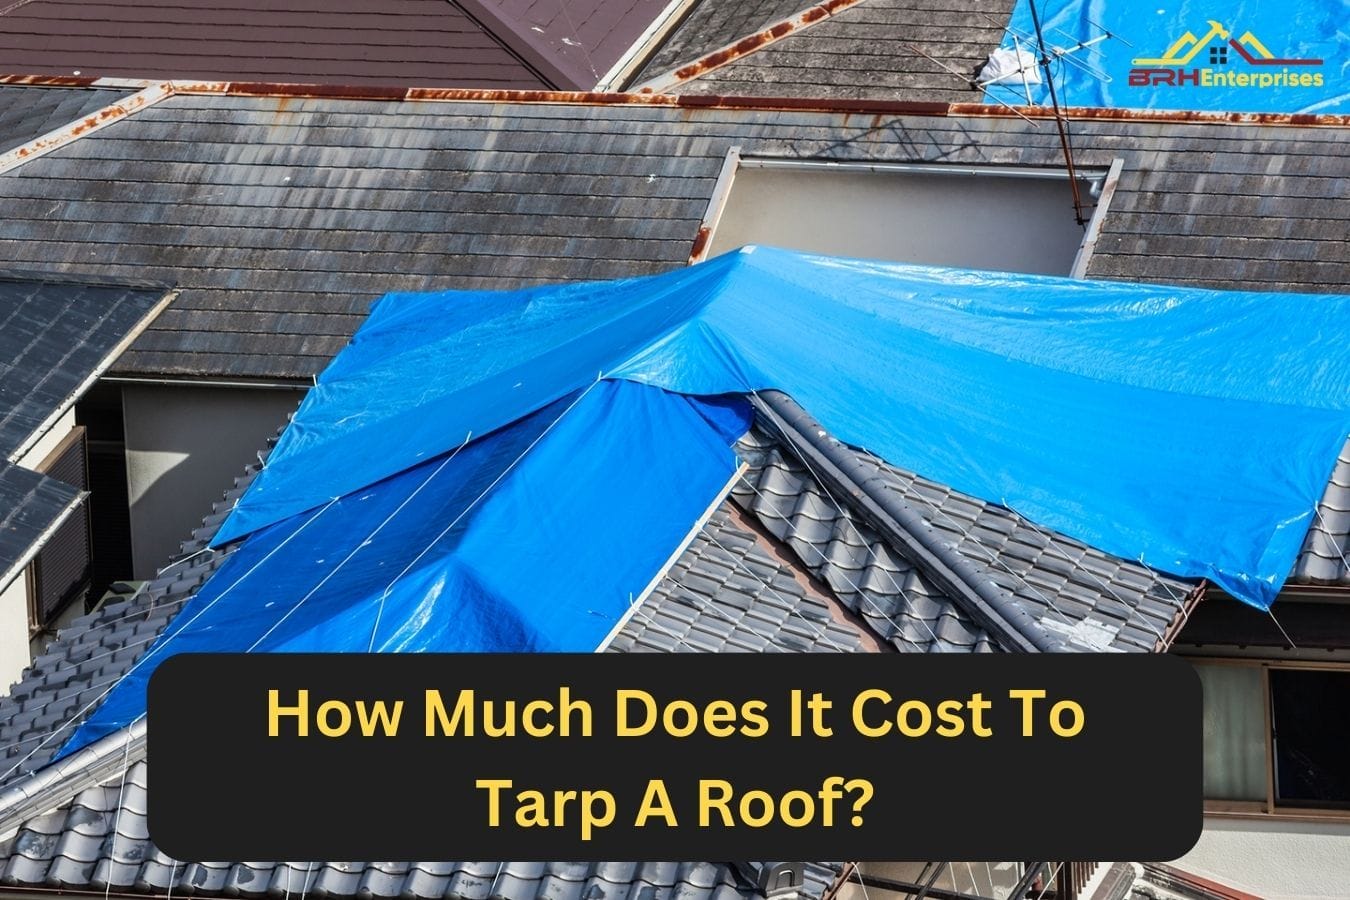 How Much Does It Cost To Tarp A Roof?